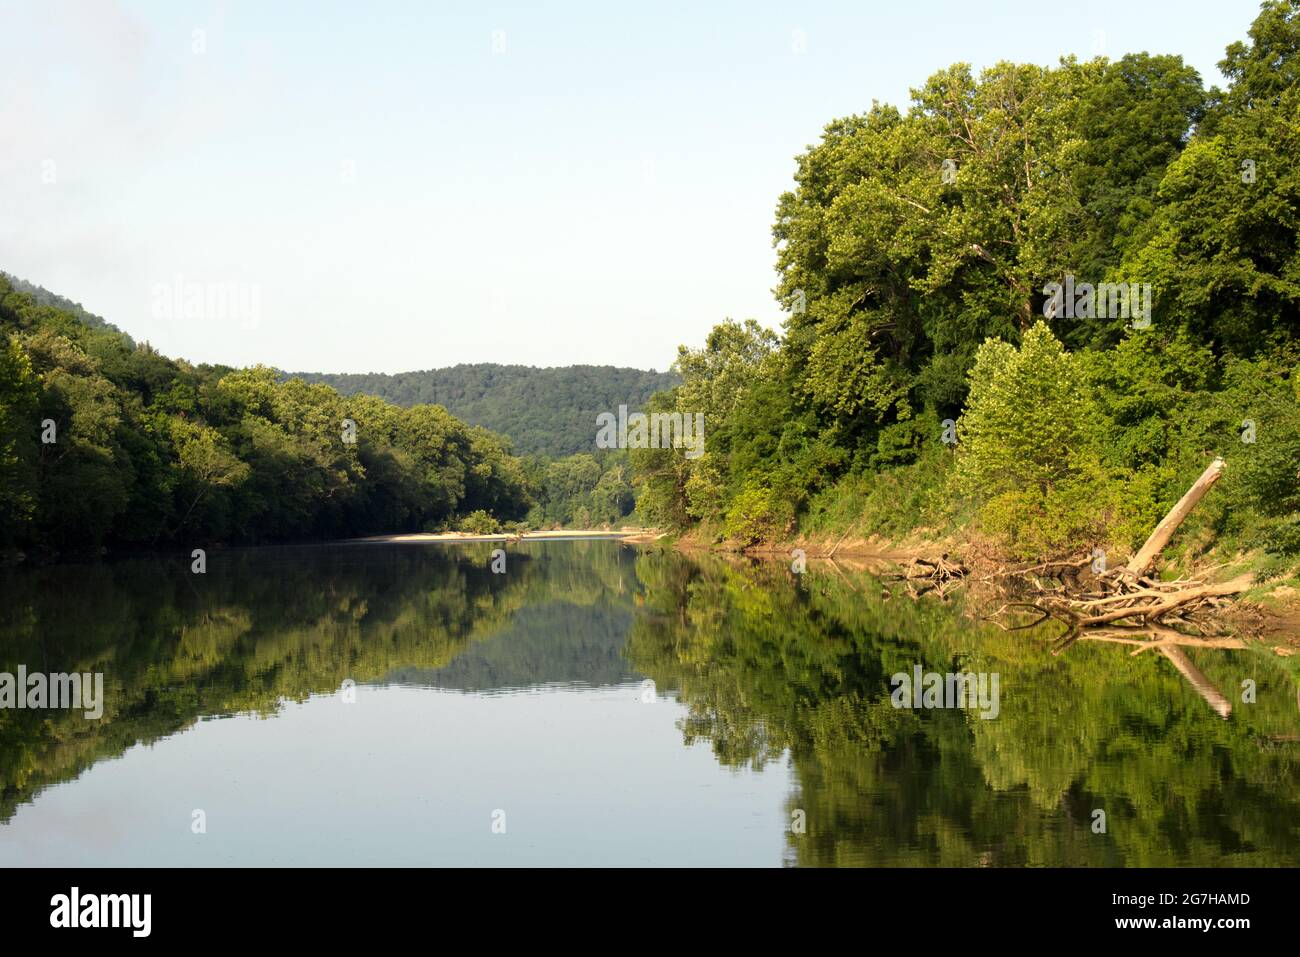 Landscape view along the Buffalo river with the trees reflected in the calm water Stock Photo